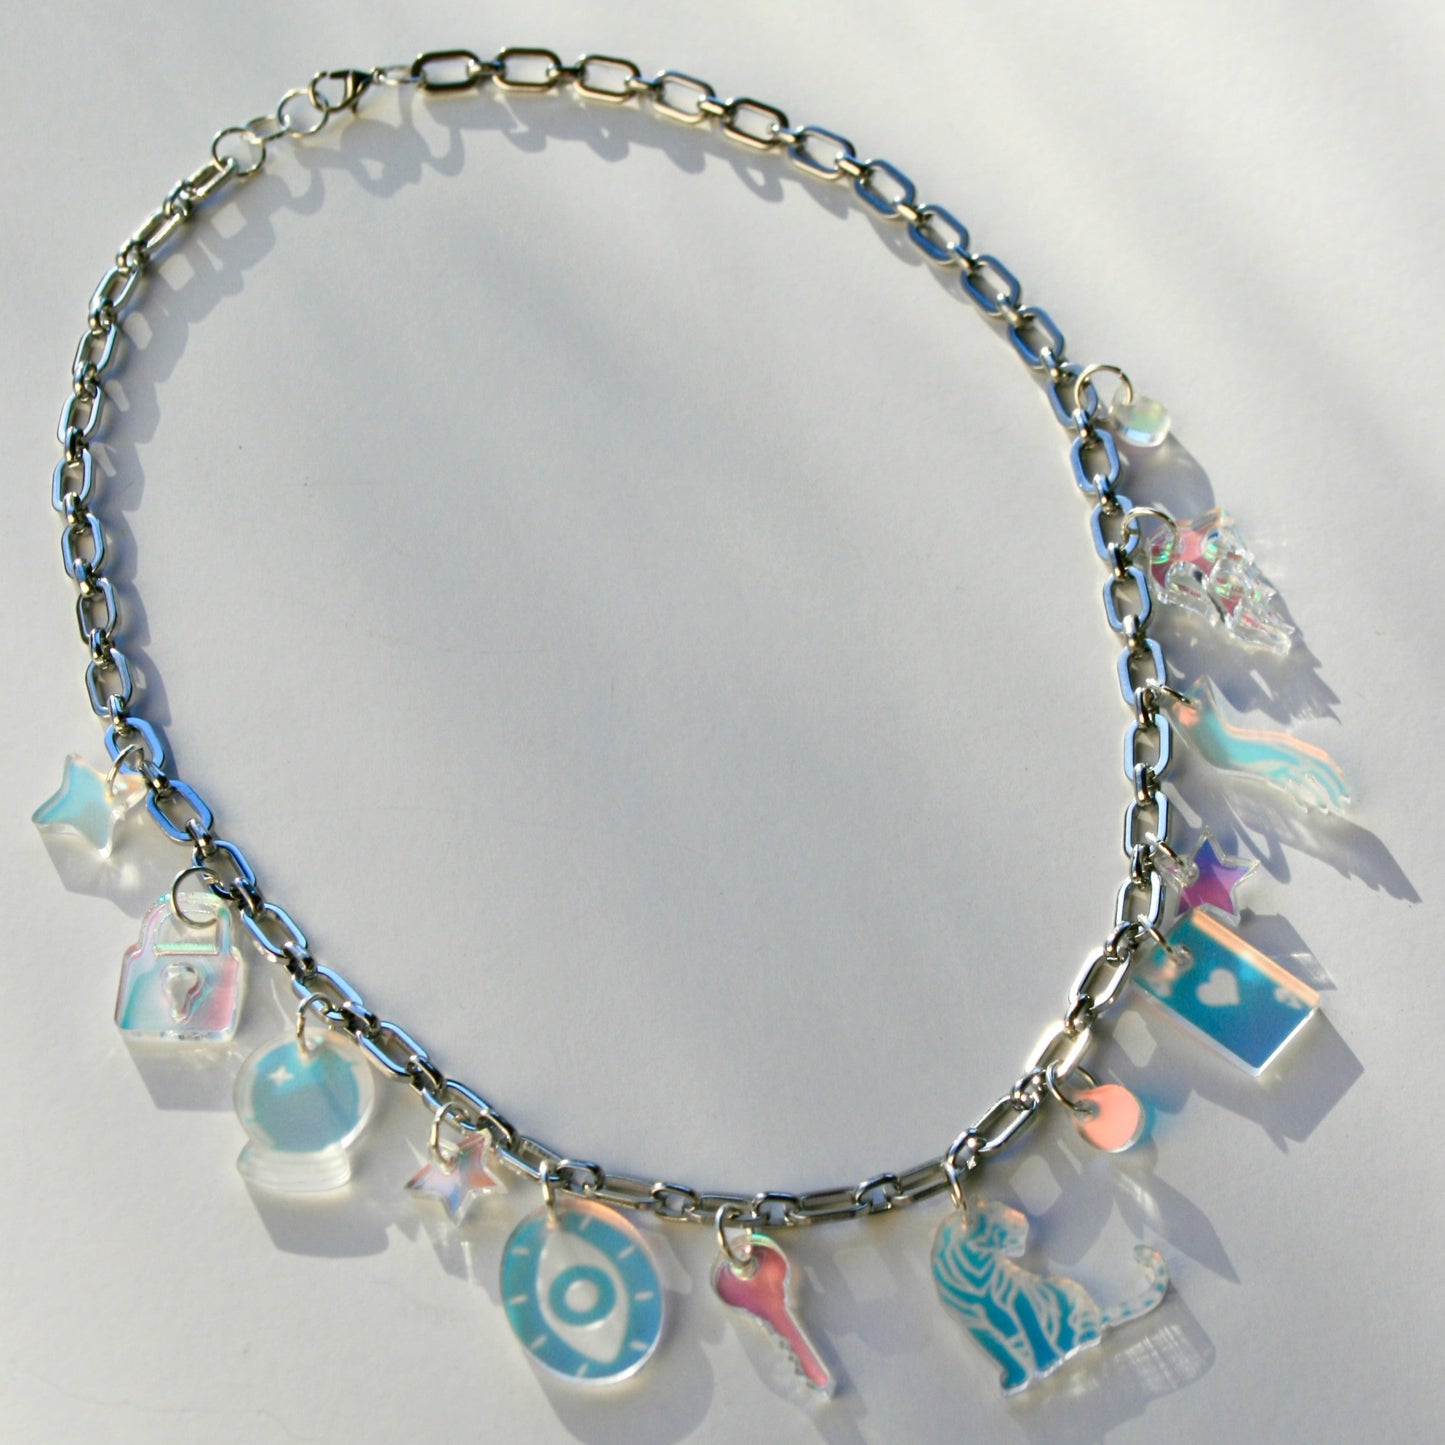 Iridescent Charm Necklace - Glitter Frosted Holo OOAK One of a Kind Detailed